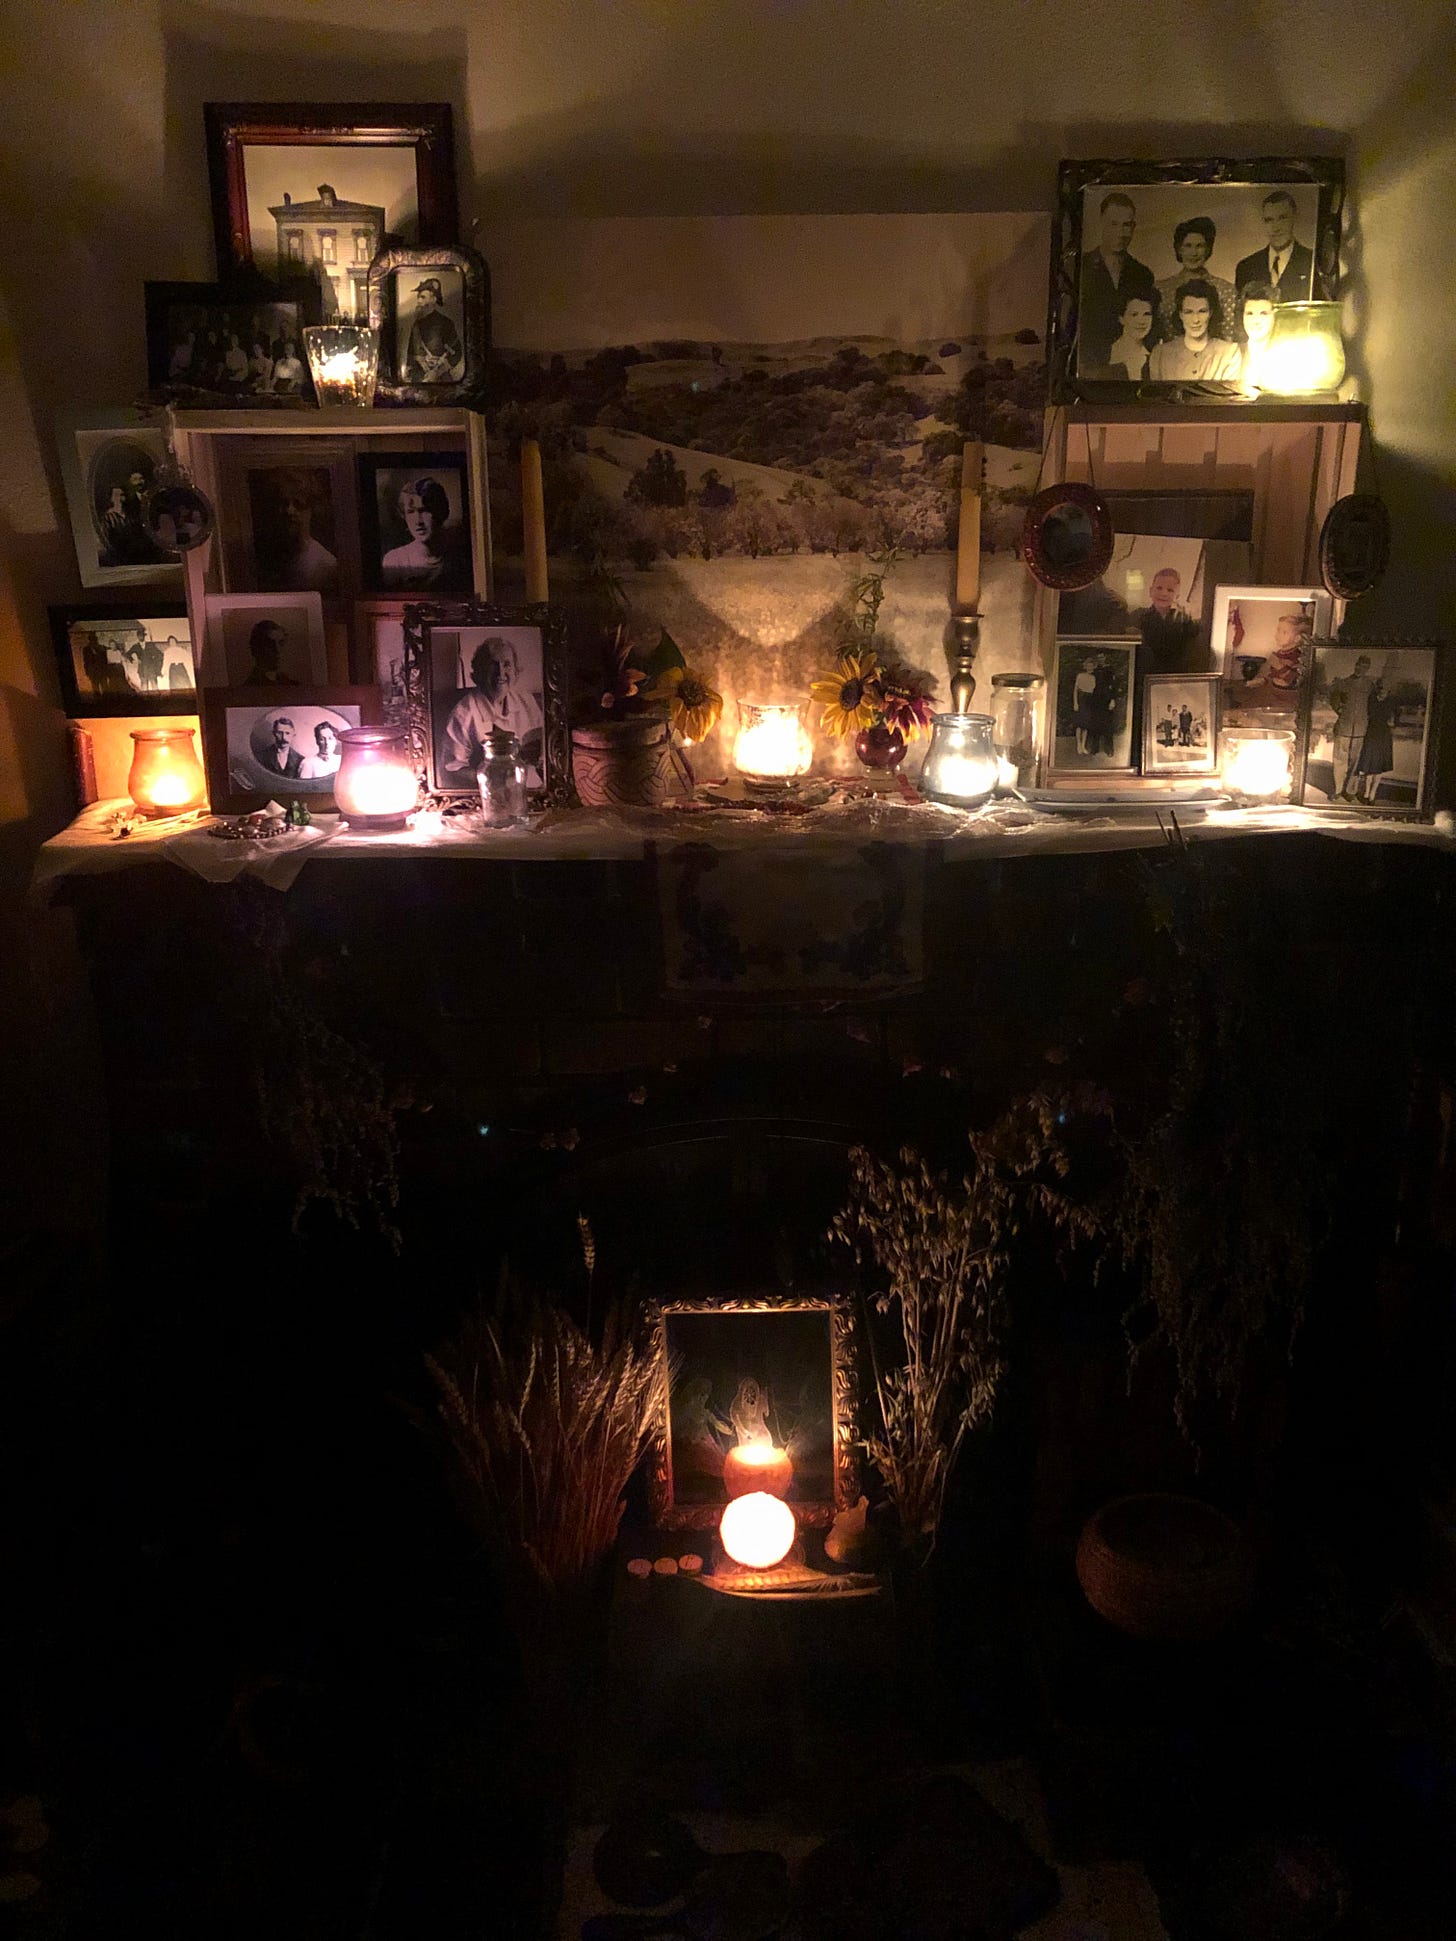 Ancestor altar with candles lit on my hearth featuring photos above and an image of the Norns below.